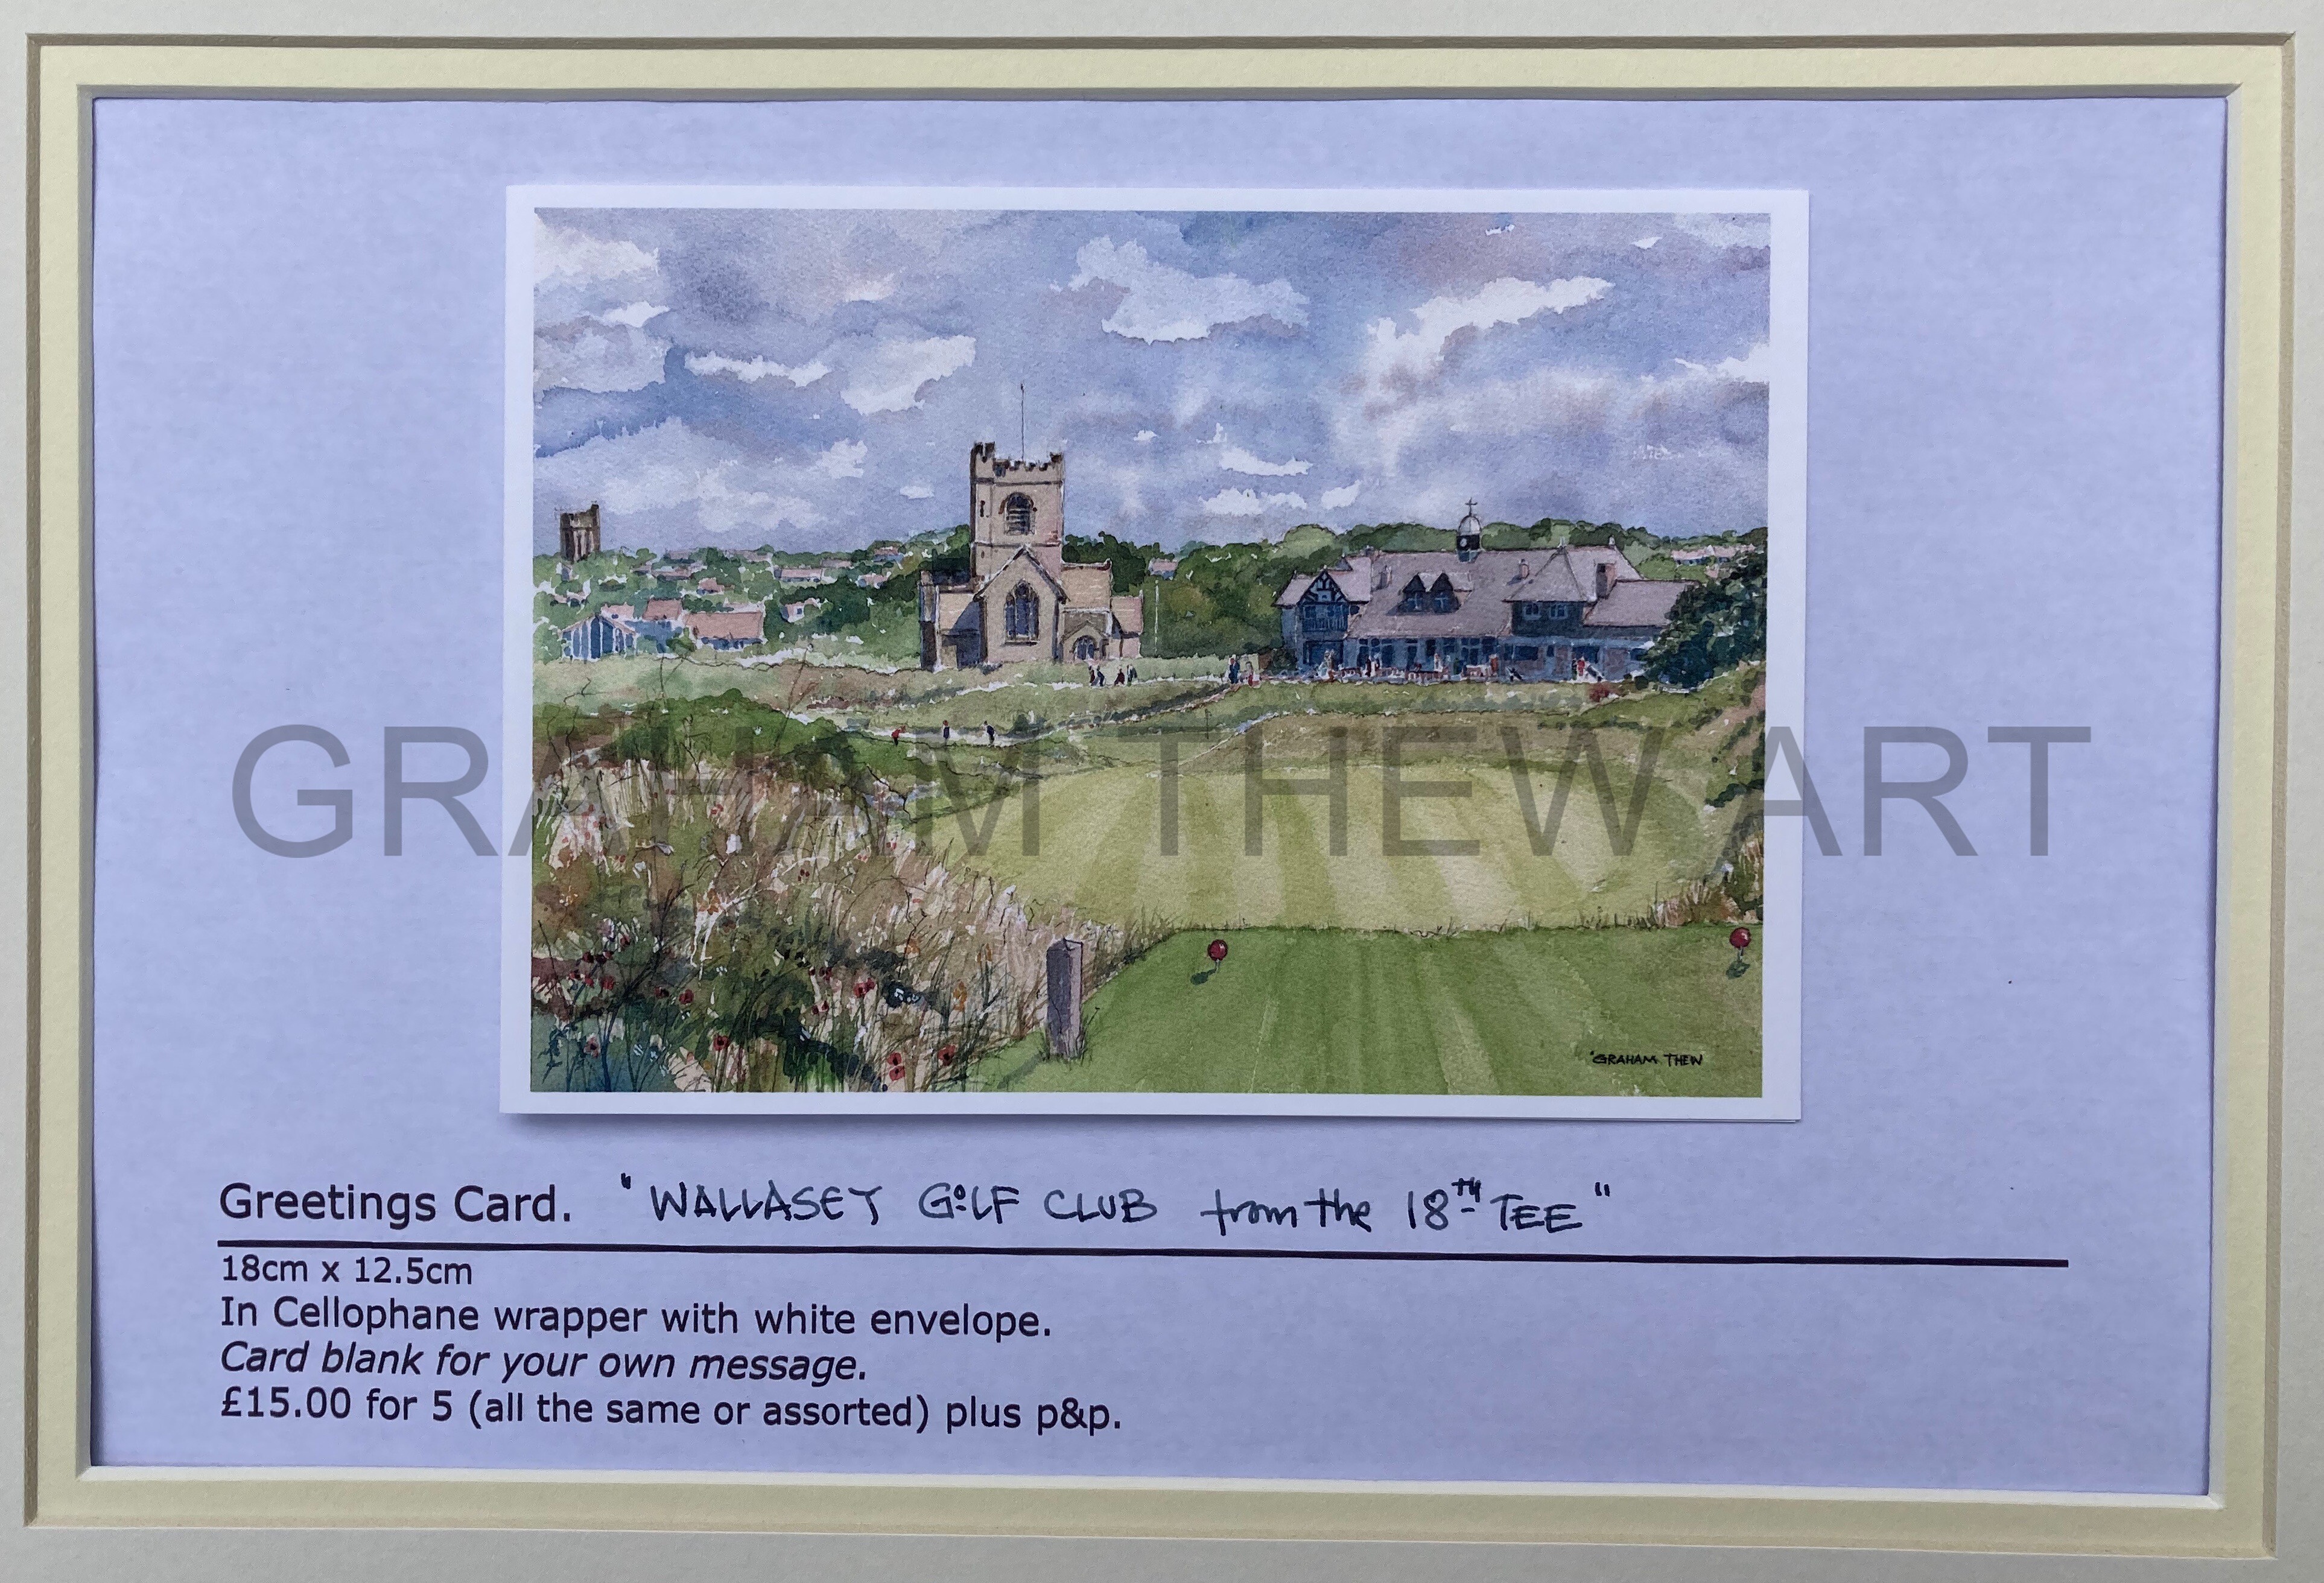 Greetings Card: Wallasey Golf club, the view from the 18th tee